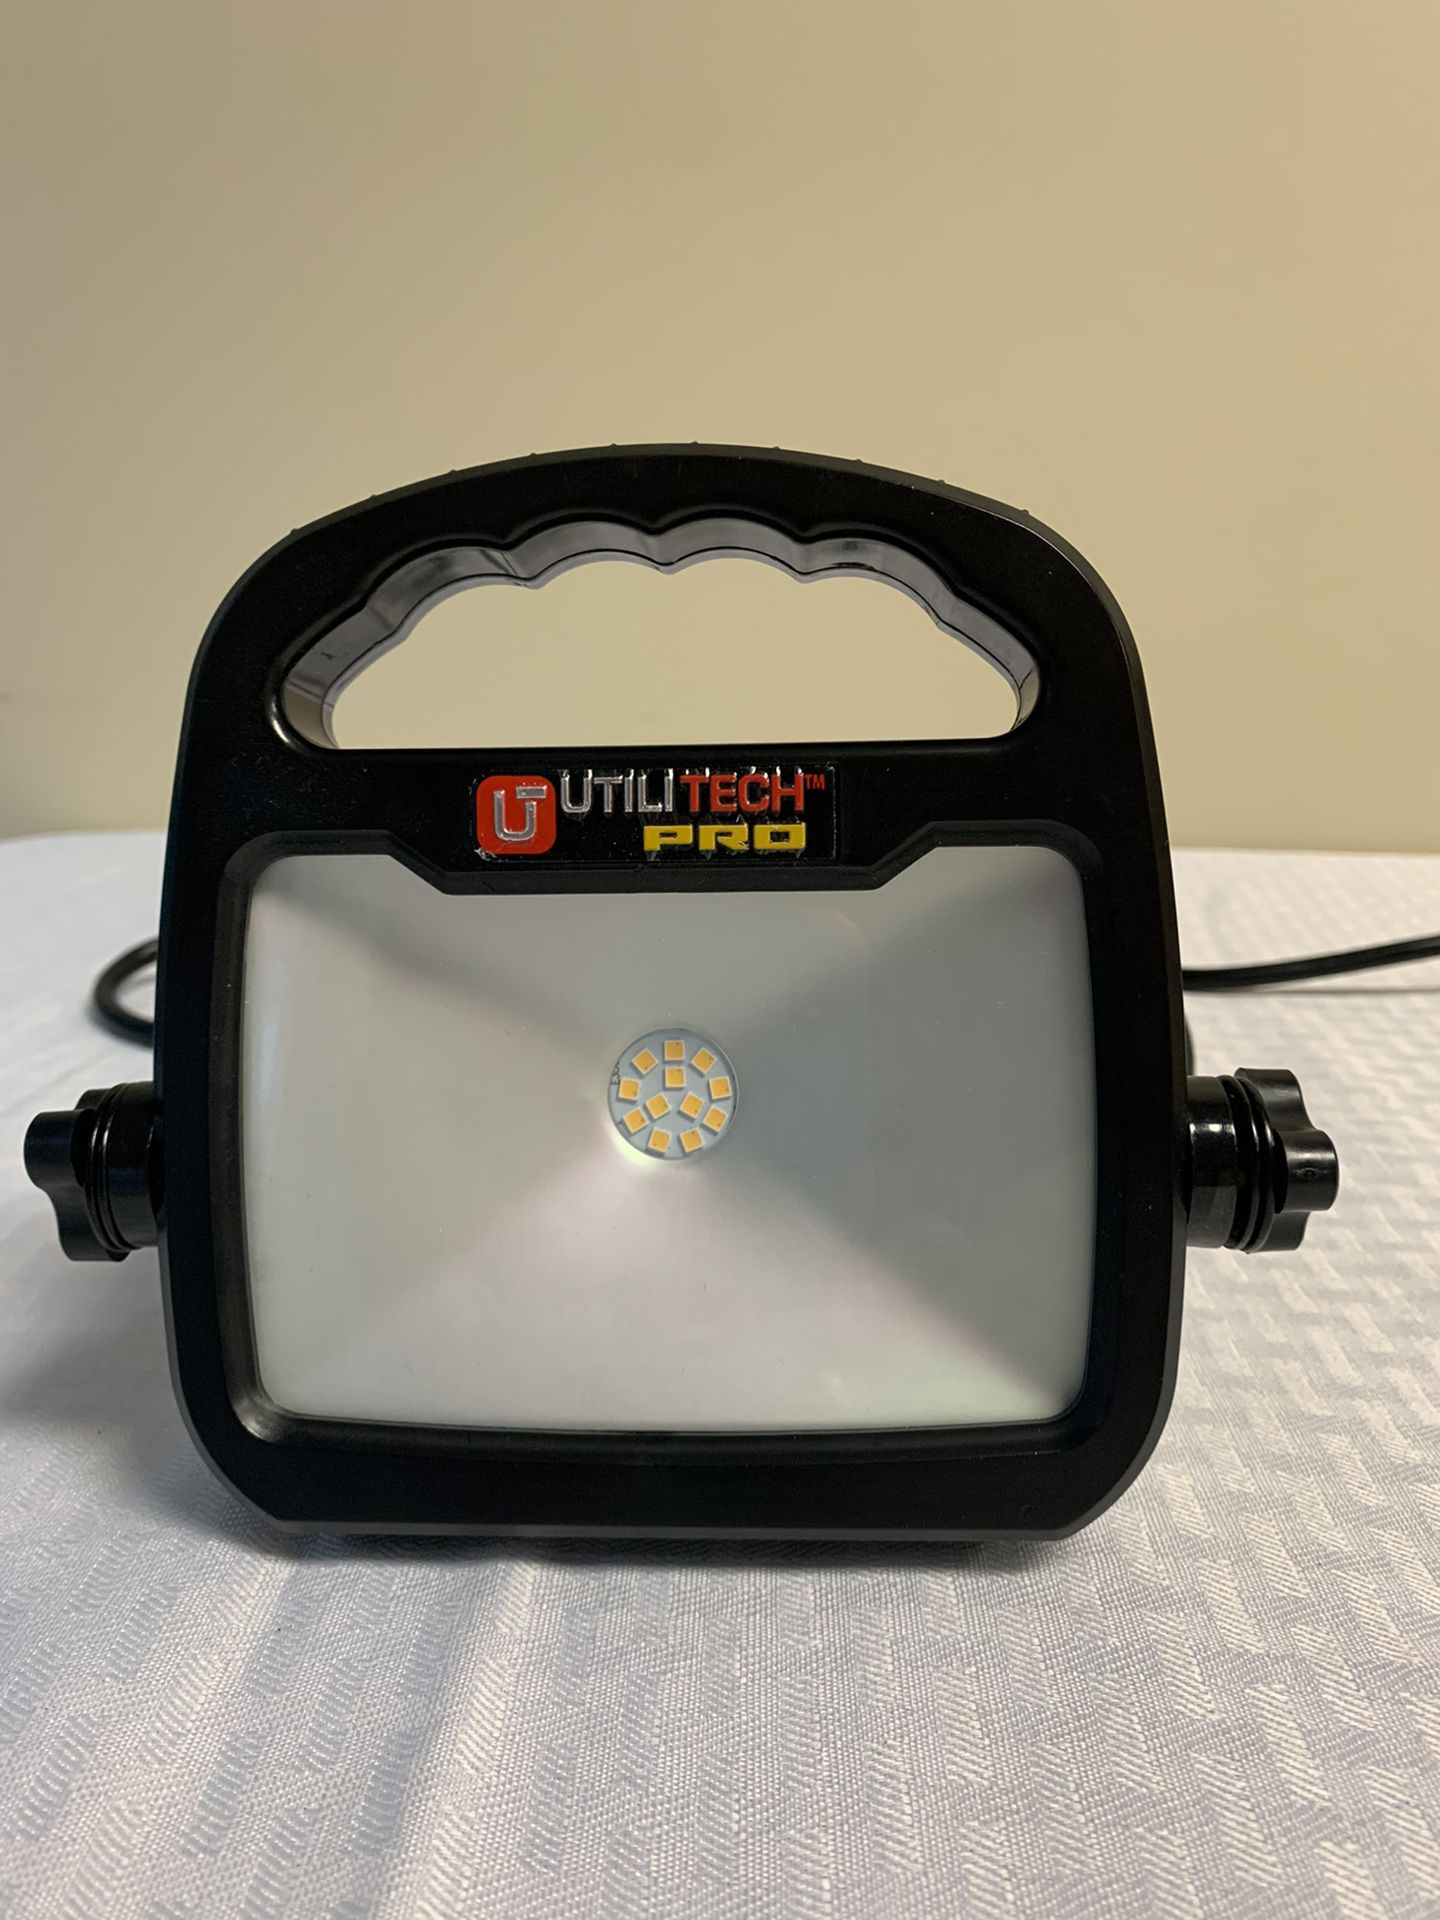 Light camera action for photo booth or photo light. Suitable for damp locations.